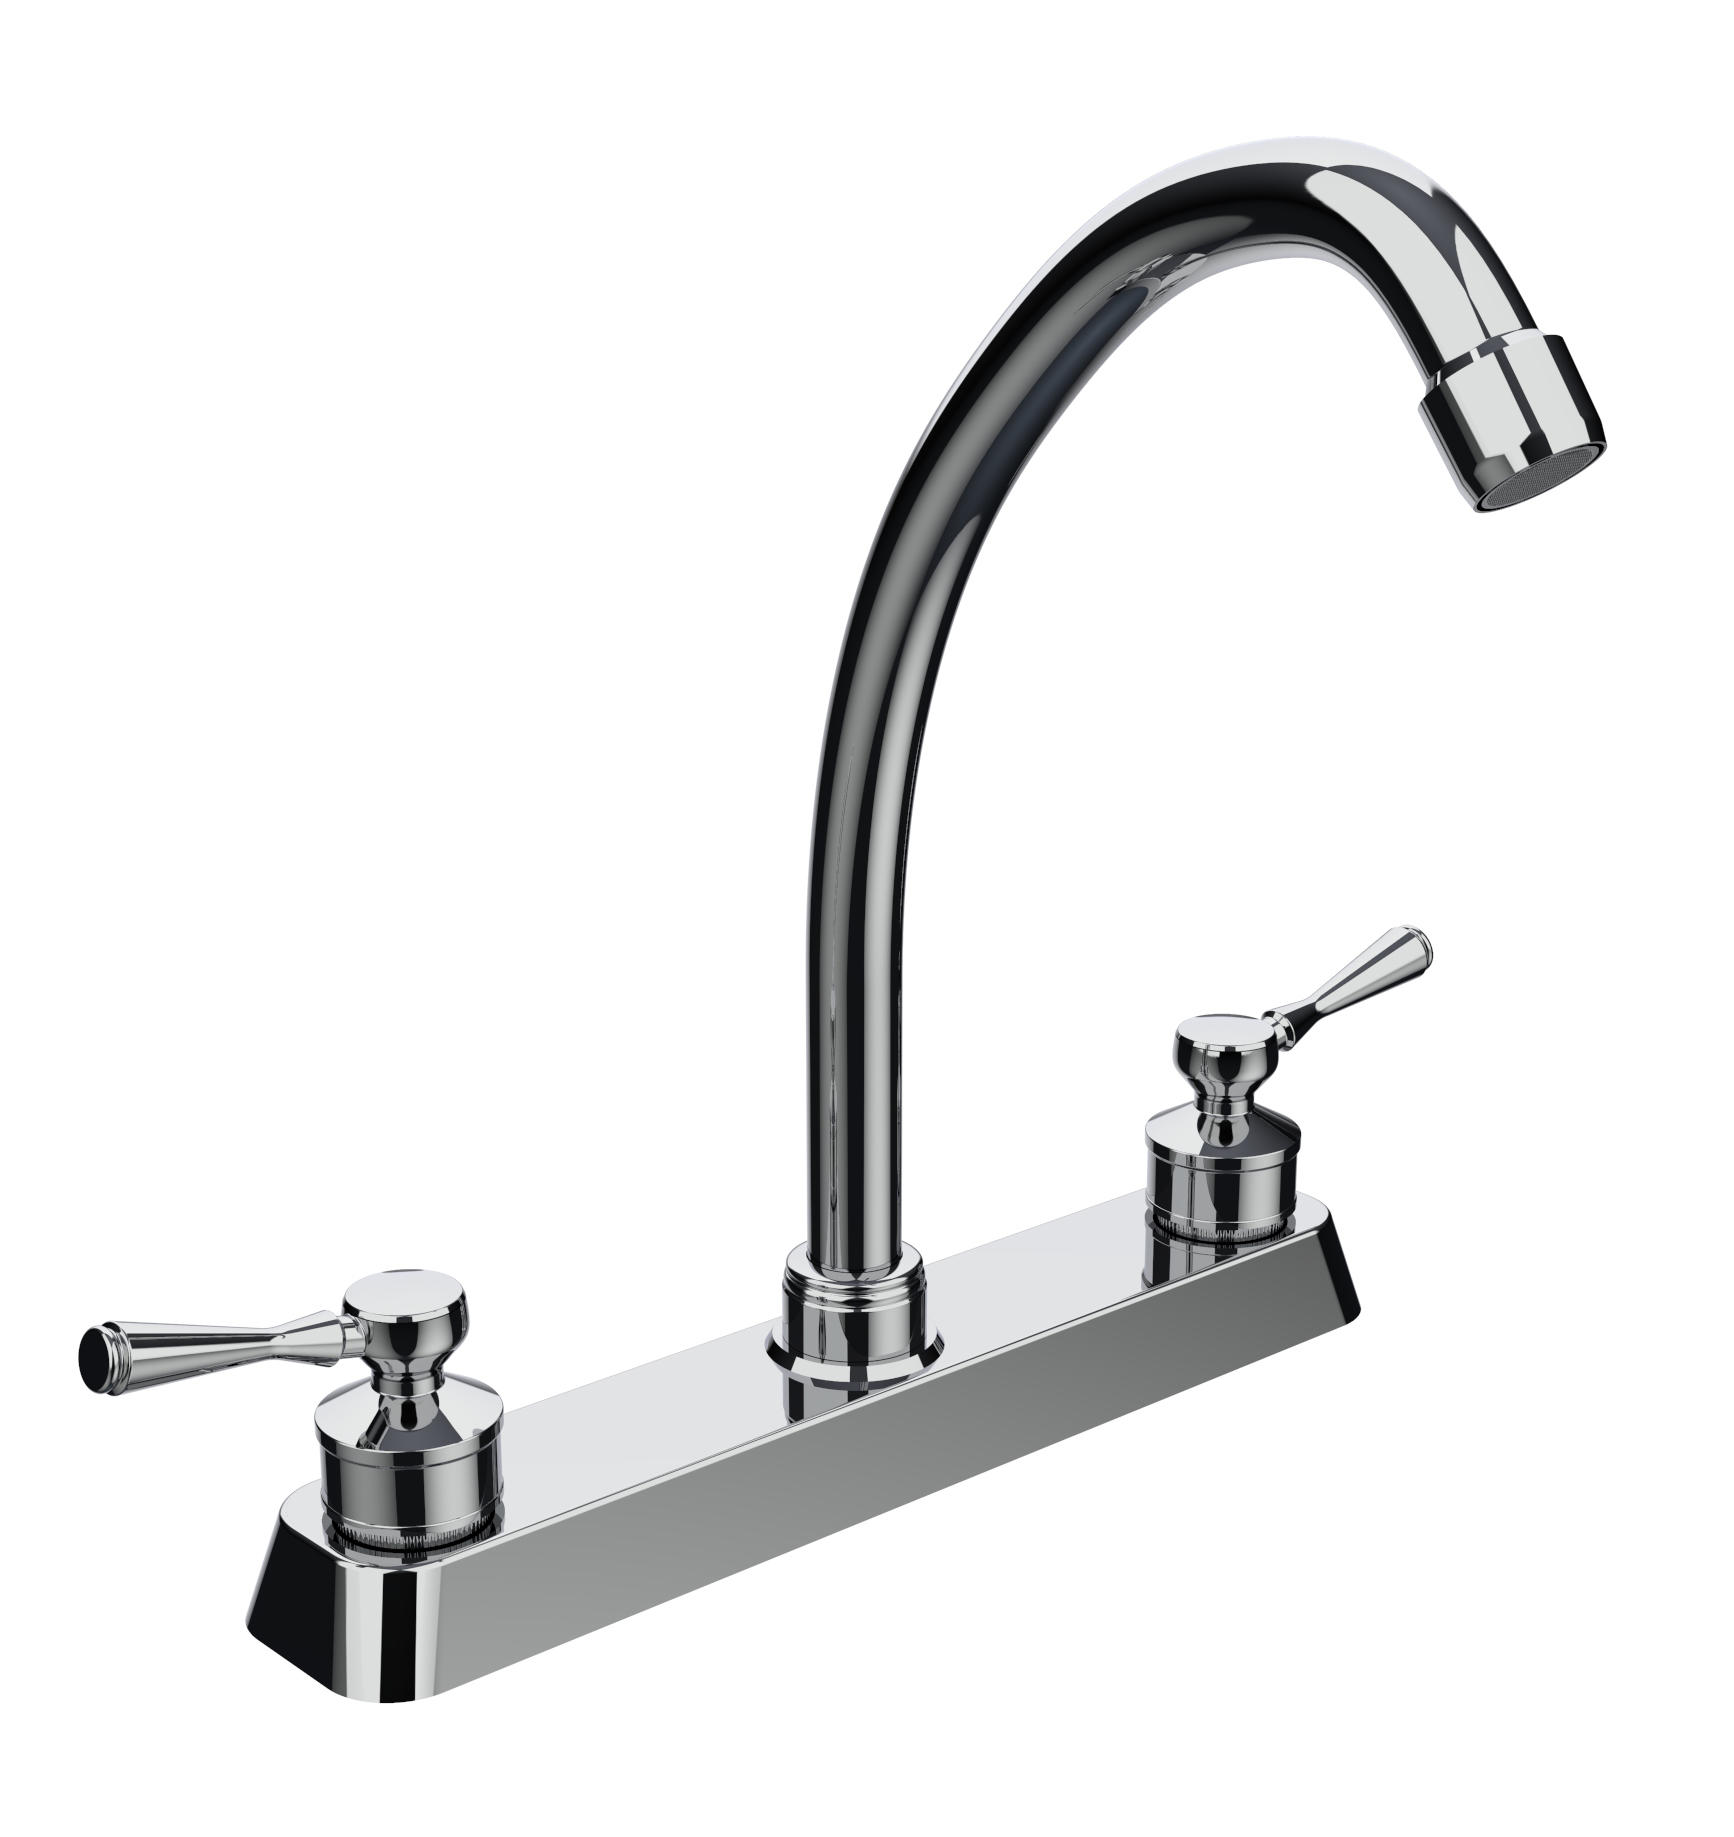 8' TWO HANDLE KITCHEN FAUCET WITH COVER, CHROME PLATE F8219E